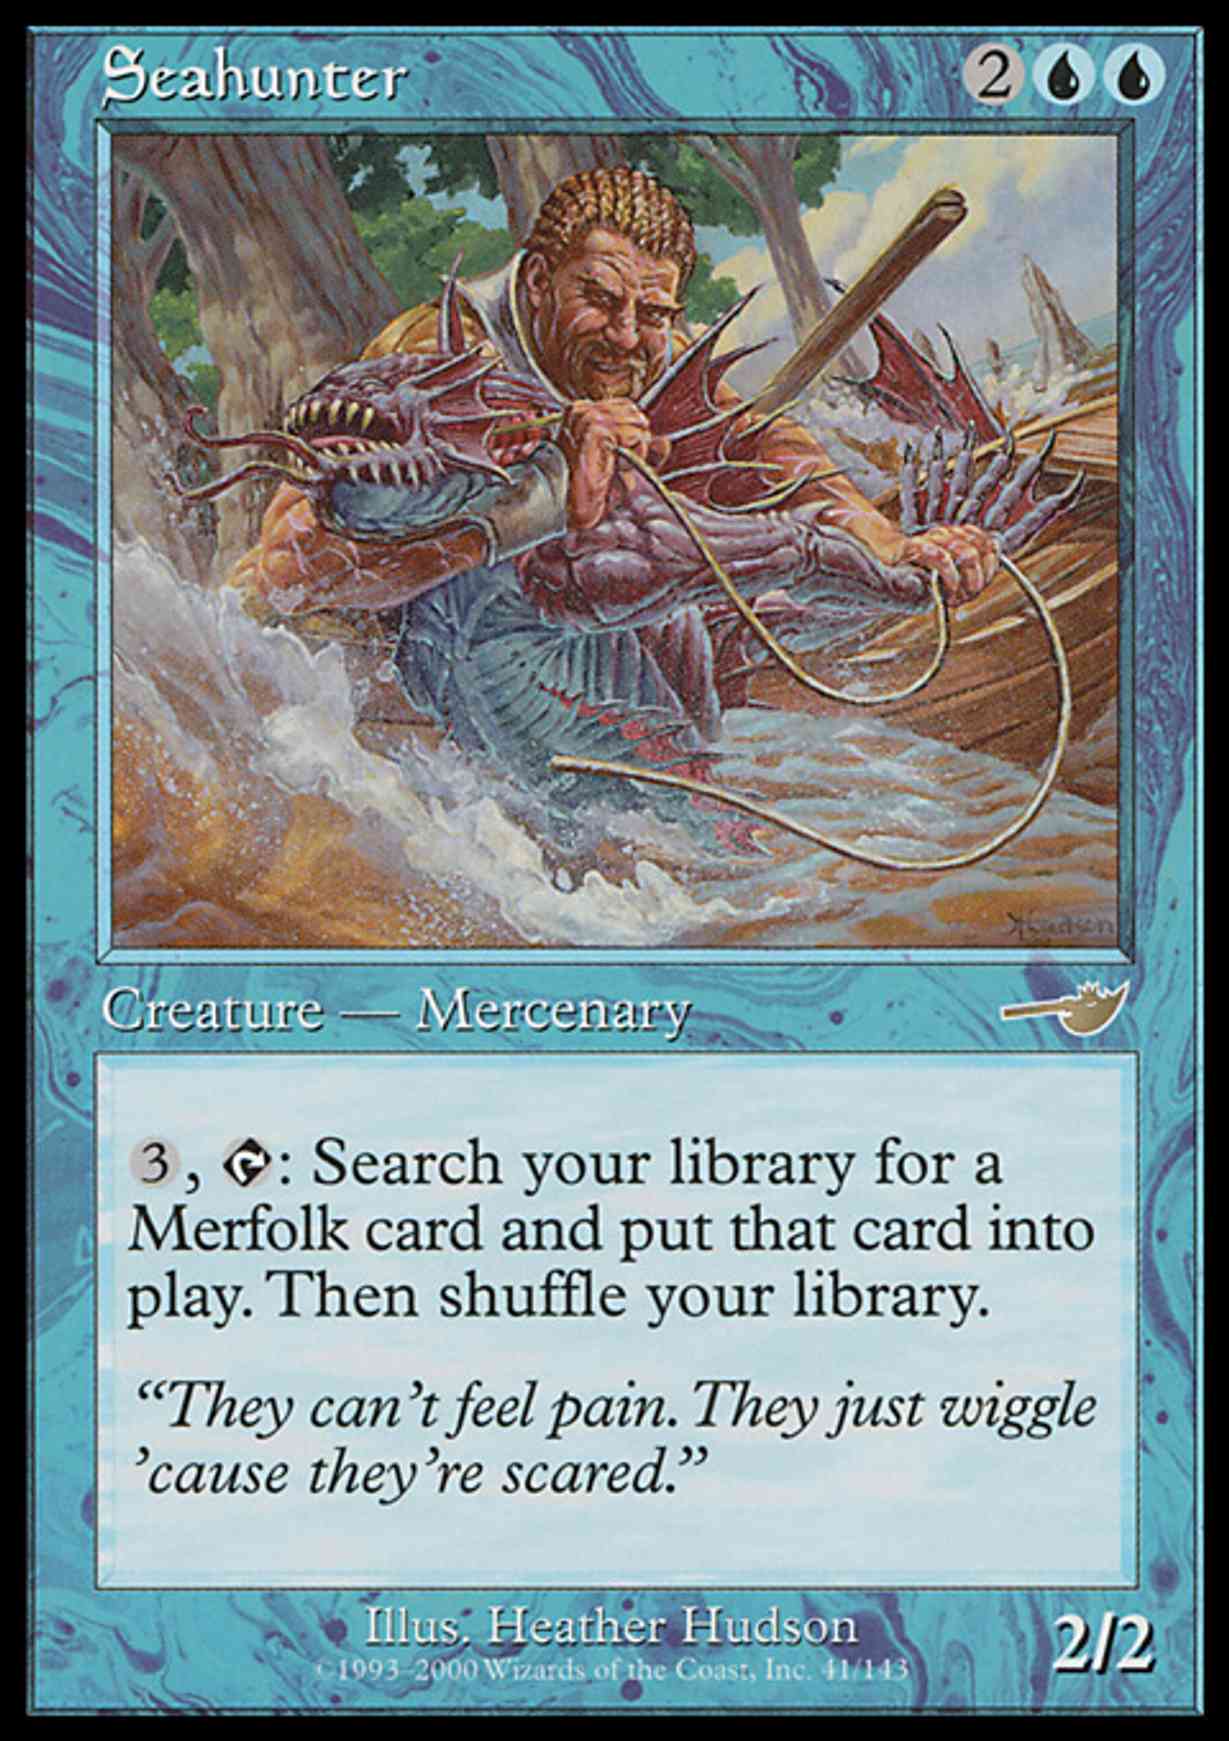 Seahunter magic card front